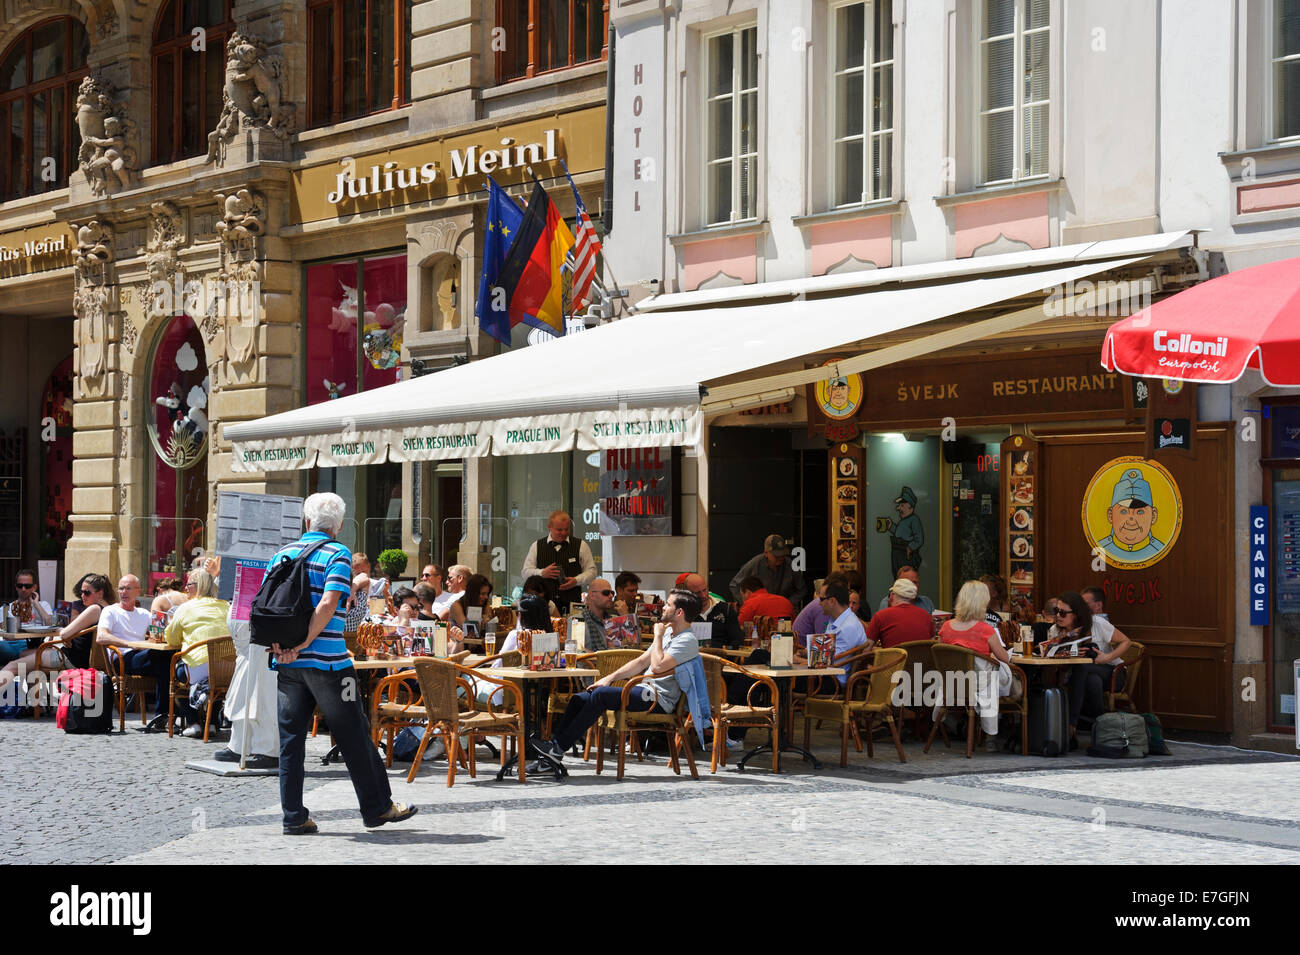 People relaxing at an alfresco restaurant in the City of Prague, Czech Republic. Stock Photo